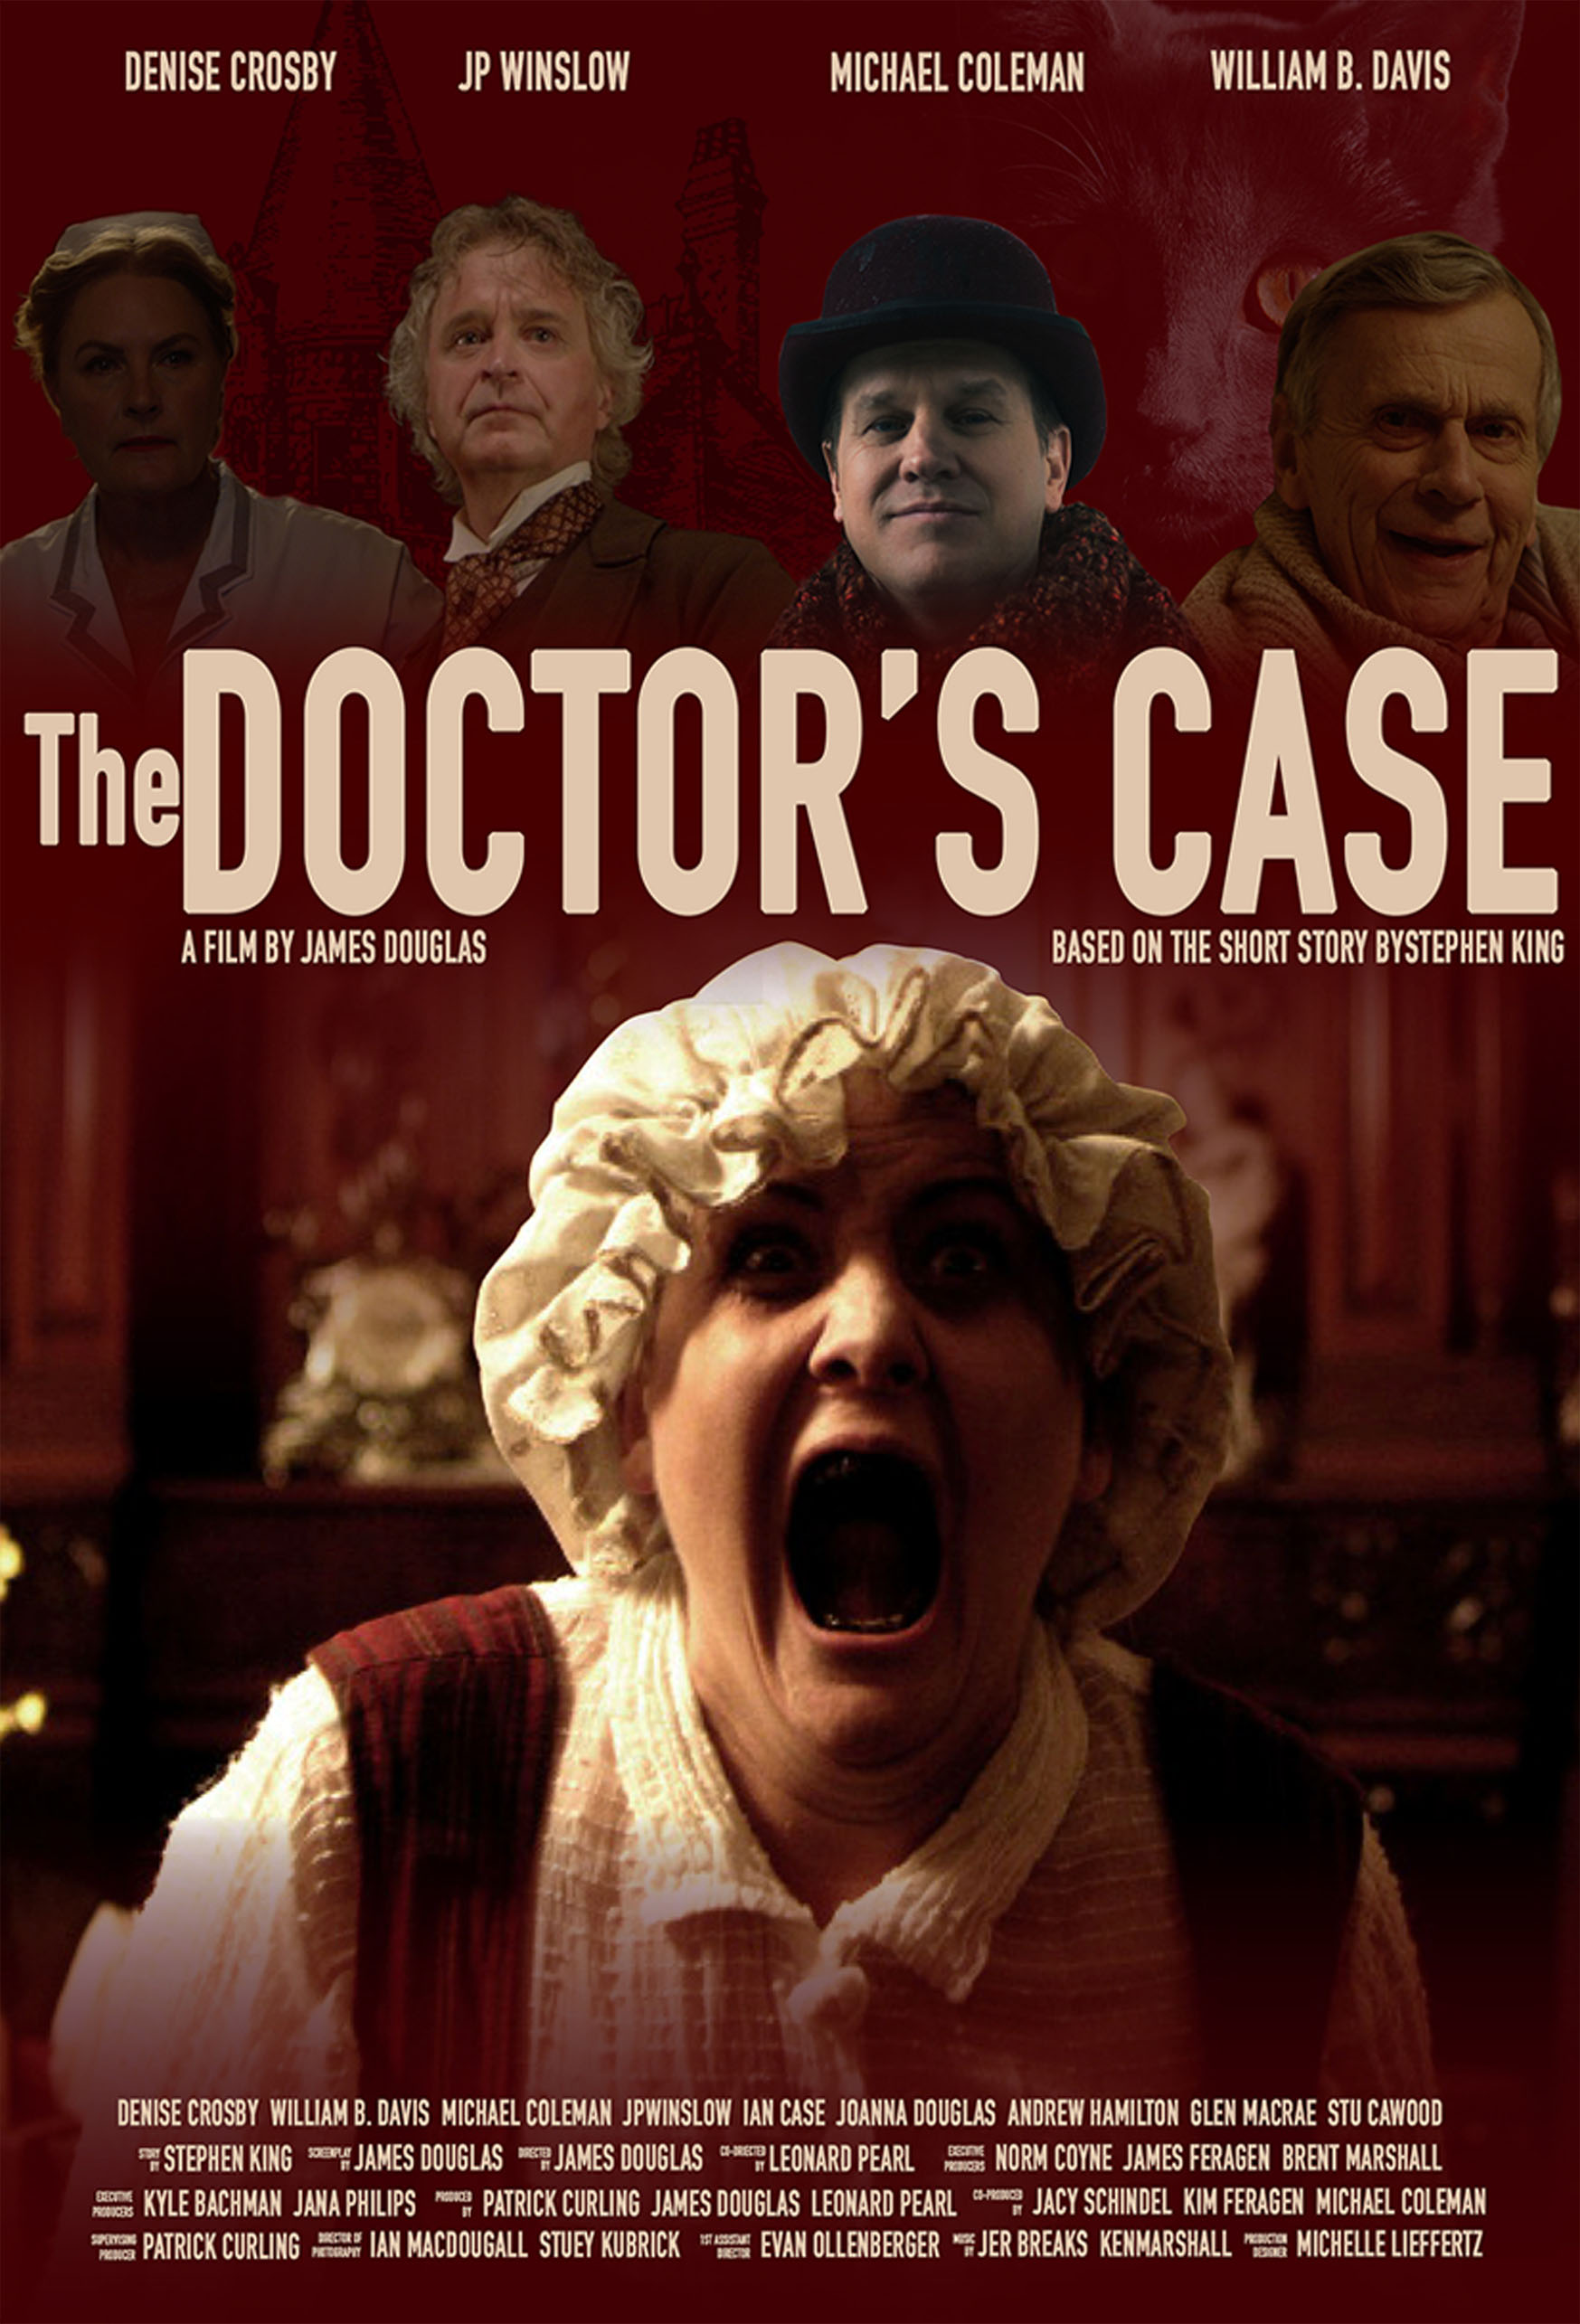 The Doctor's Case